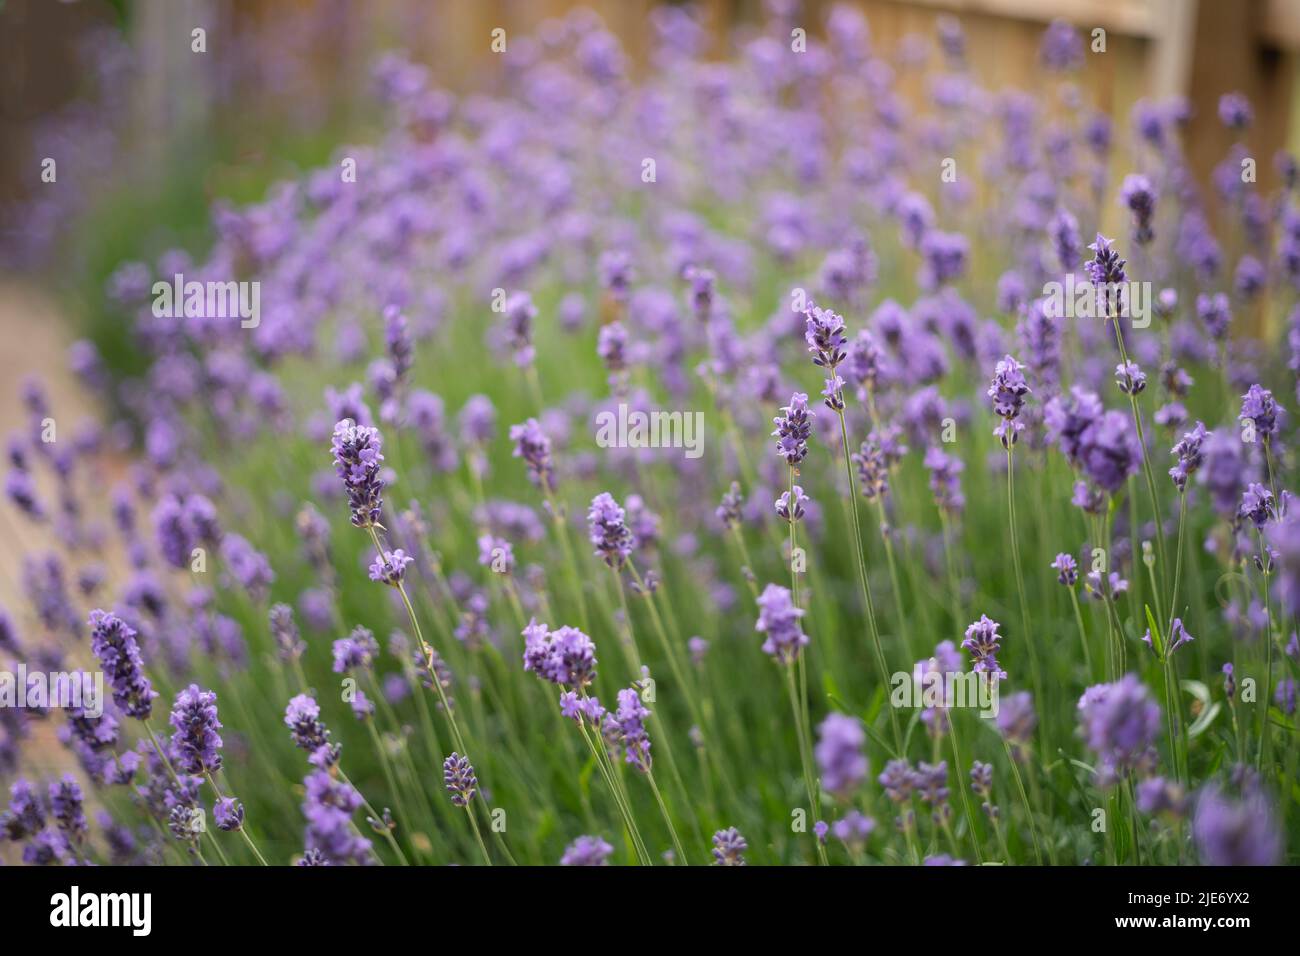 Very shallow focus on lavender growing in a garden as a border by a picket fence. Stock Photo